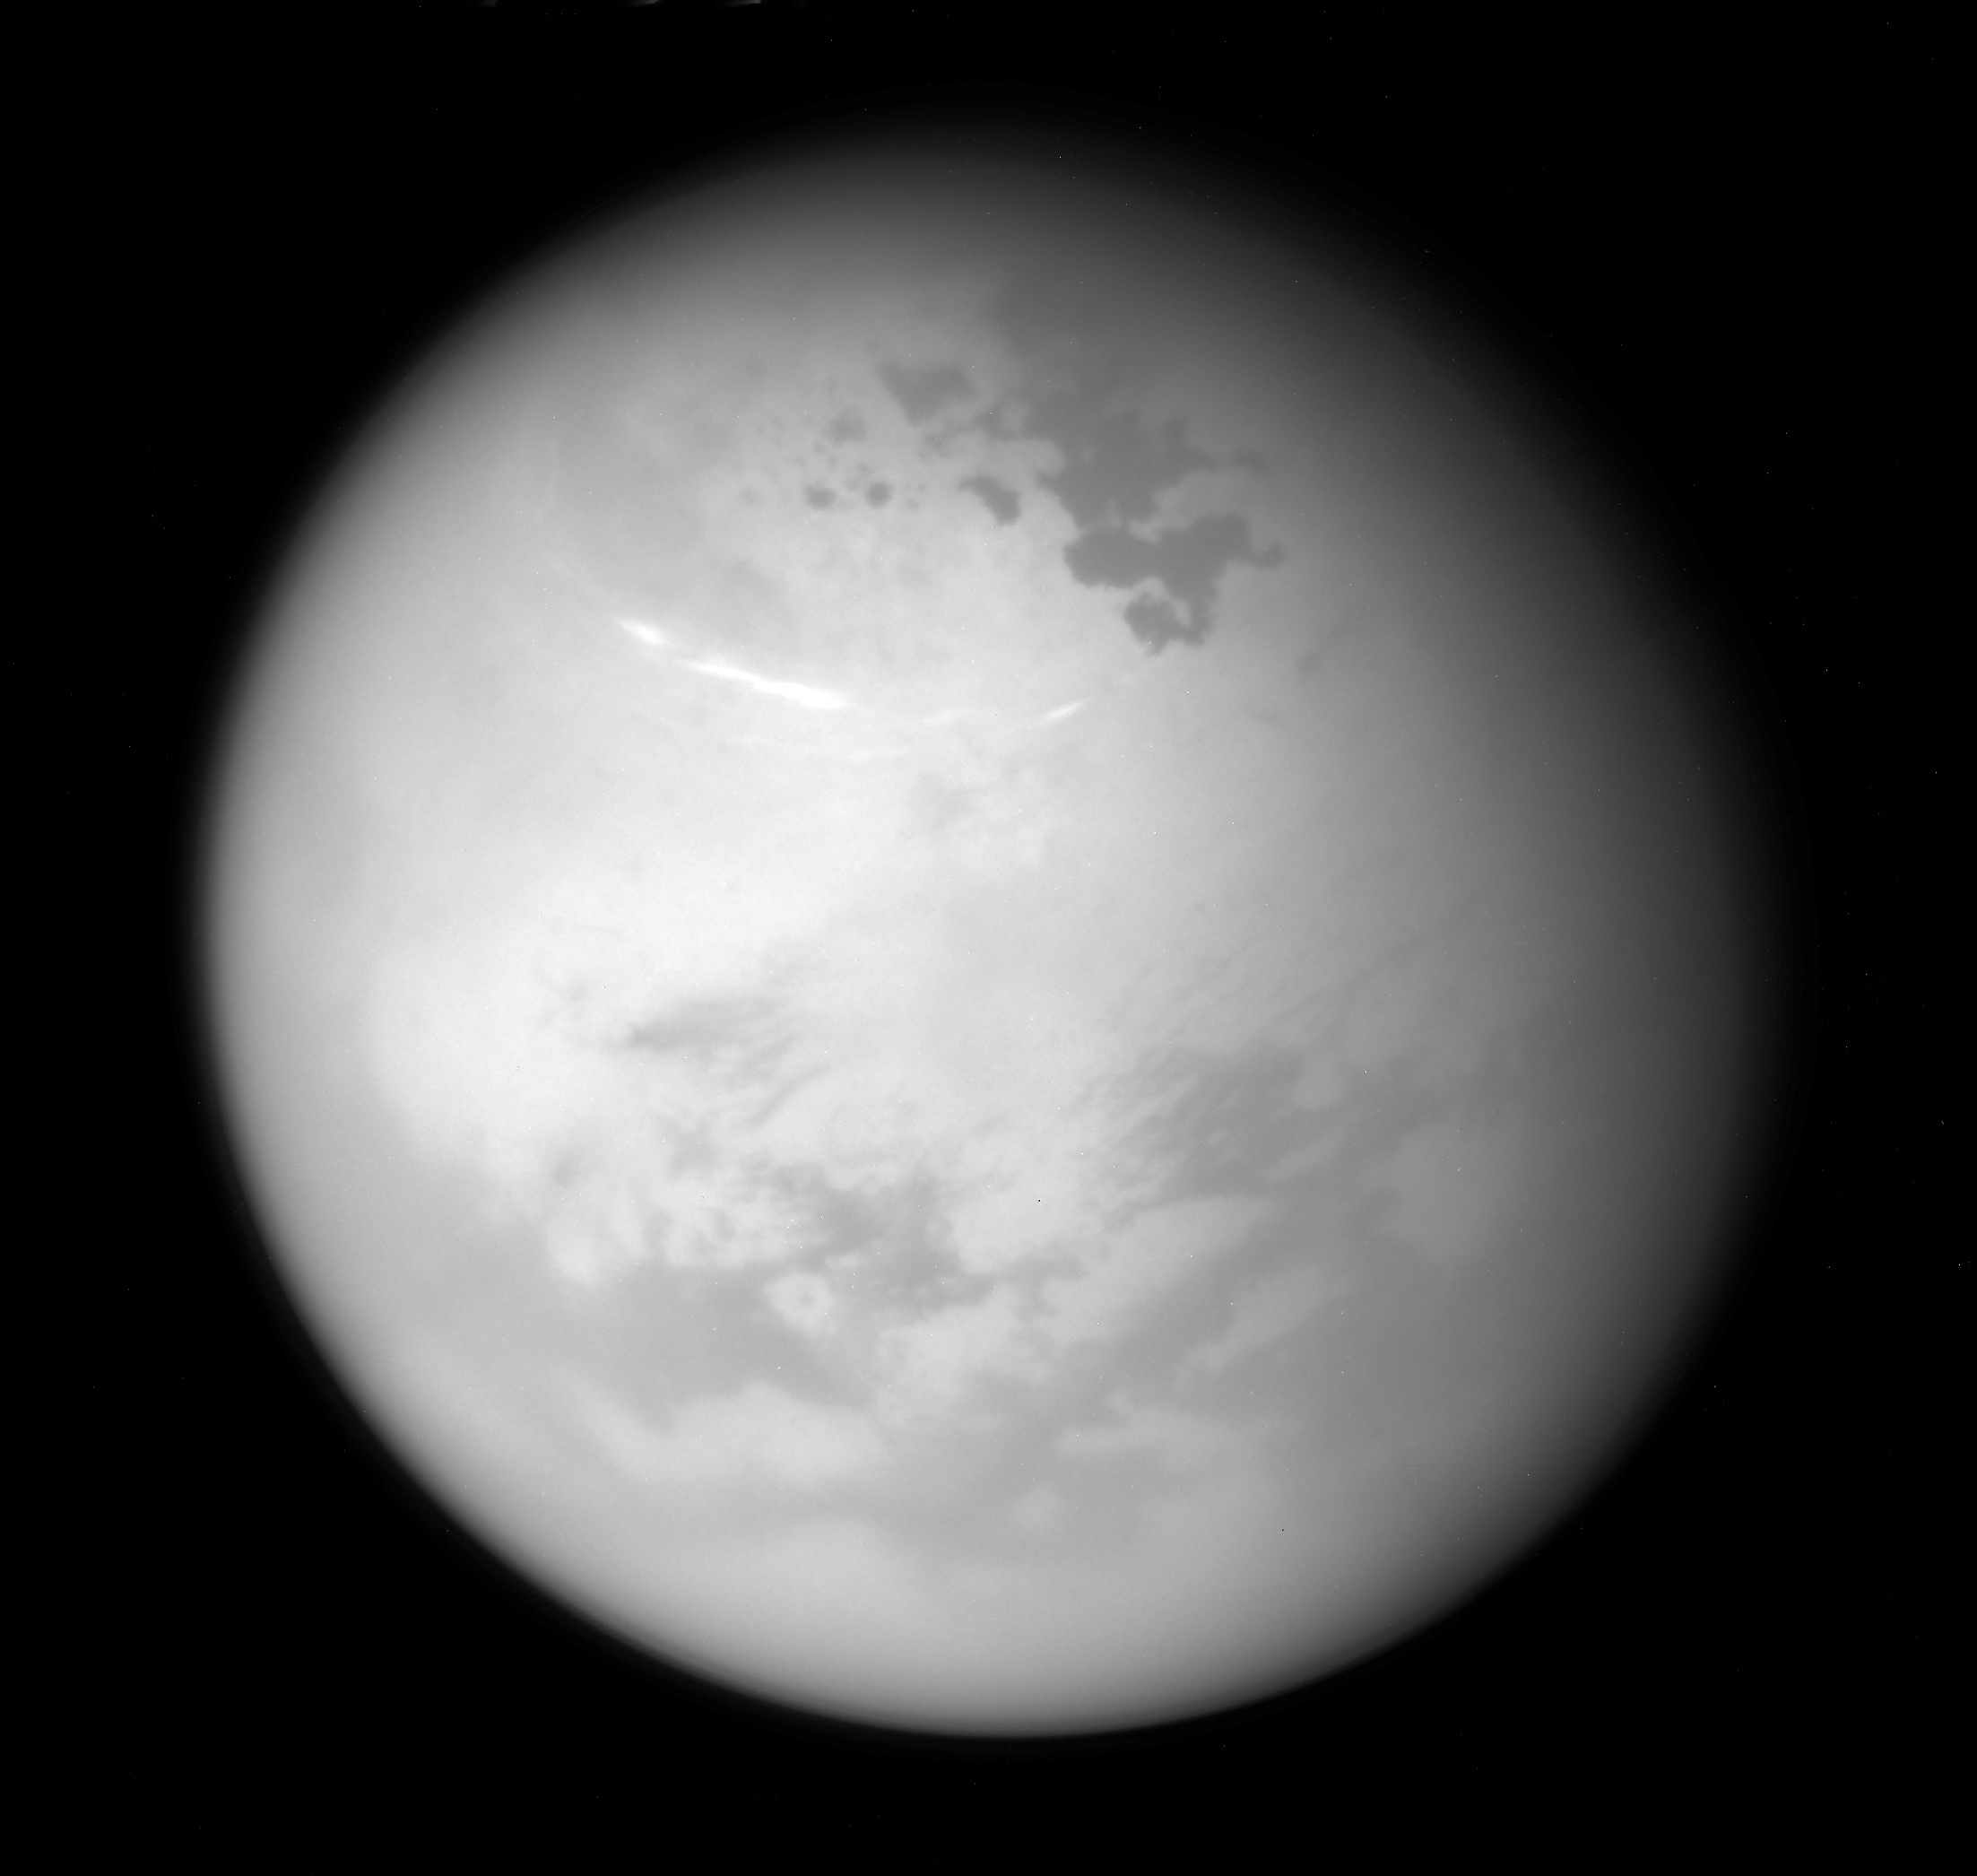 This  June 9, 2017 image made available by NASA shows bright methane clouds drifting in the summer skies of Saturn's moon Titan, along with dark hydrocarbon lakes and seas clustered around the north pole, as seen from the Cassini spacecraft. (NASA/JPL-Caltech/Space Science Institute via AP)